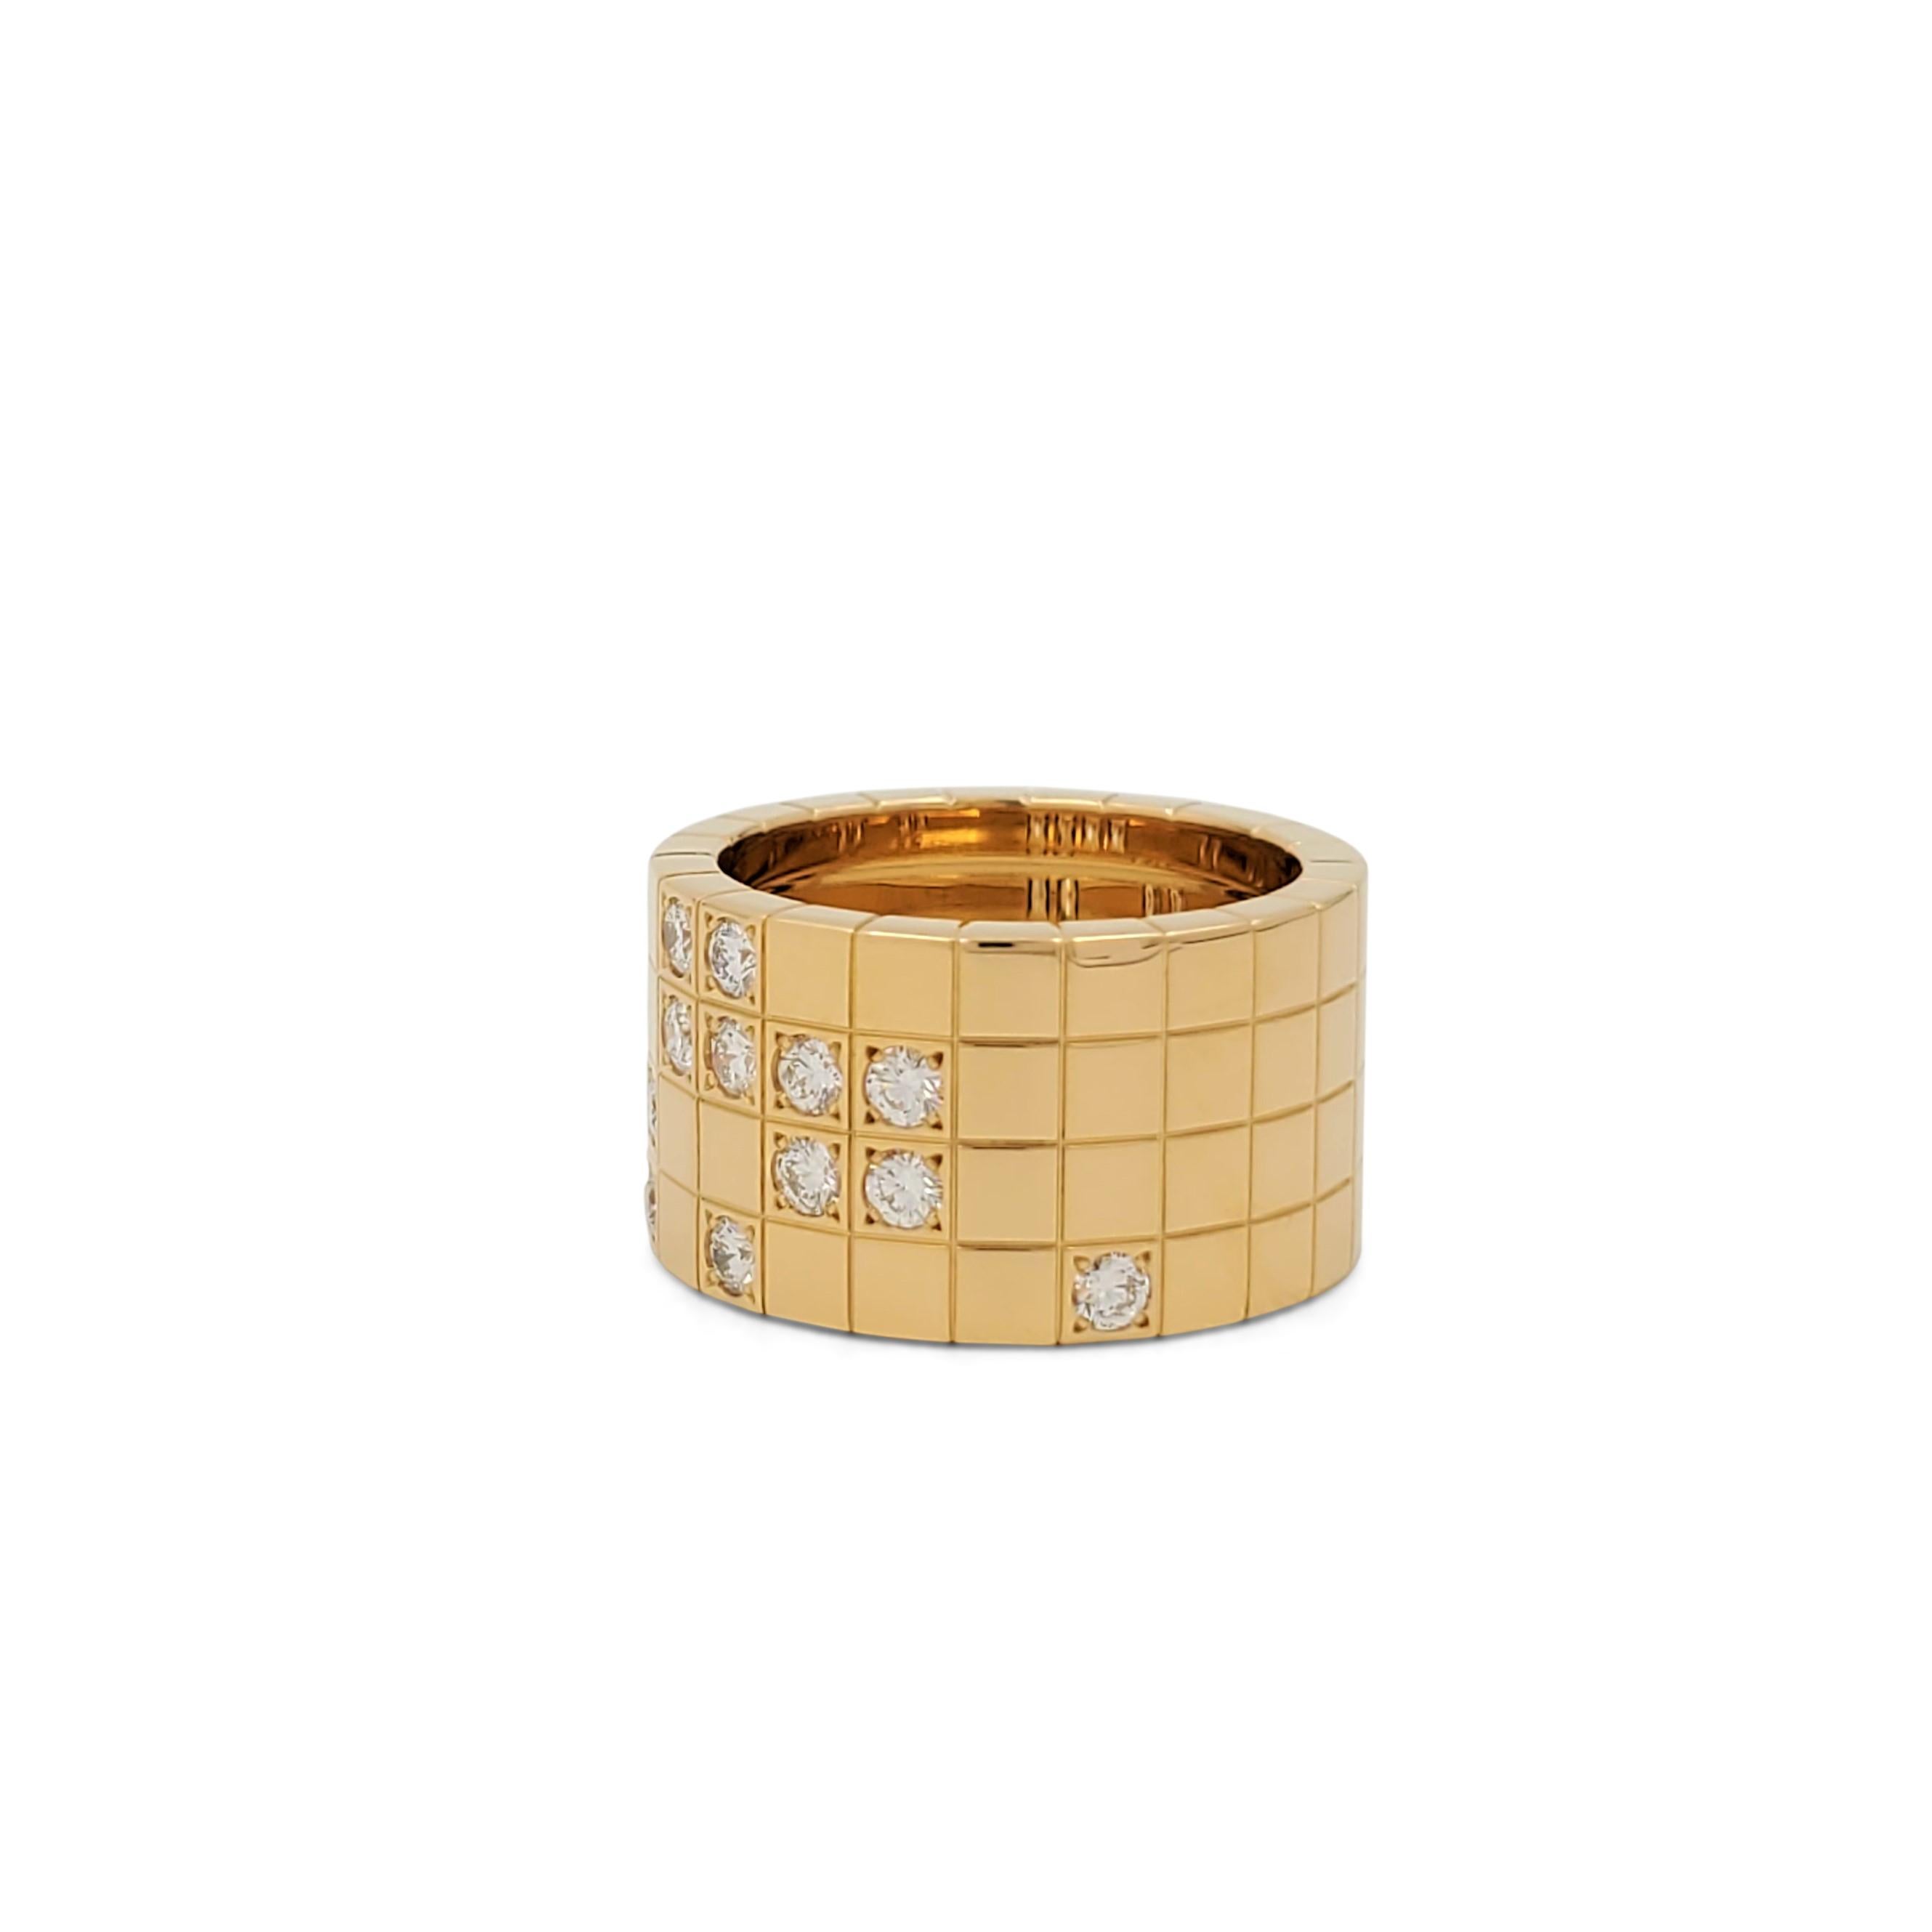 Authentic Cartier 'Lanières' ring crafted in 18 karat yellow gold designed as a continuous sequence of square motifs, accented by a geometric pattern of round brilliant cut diamonds weighing an estimated 0.60 carats total to the front. Signed